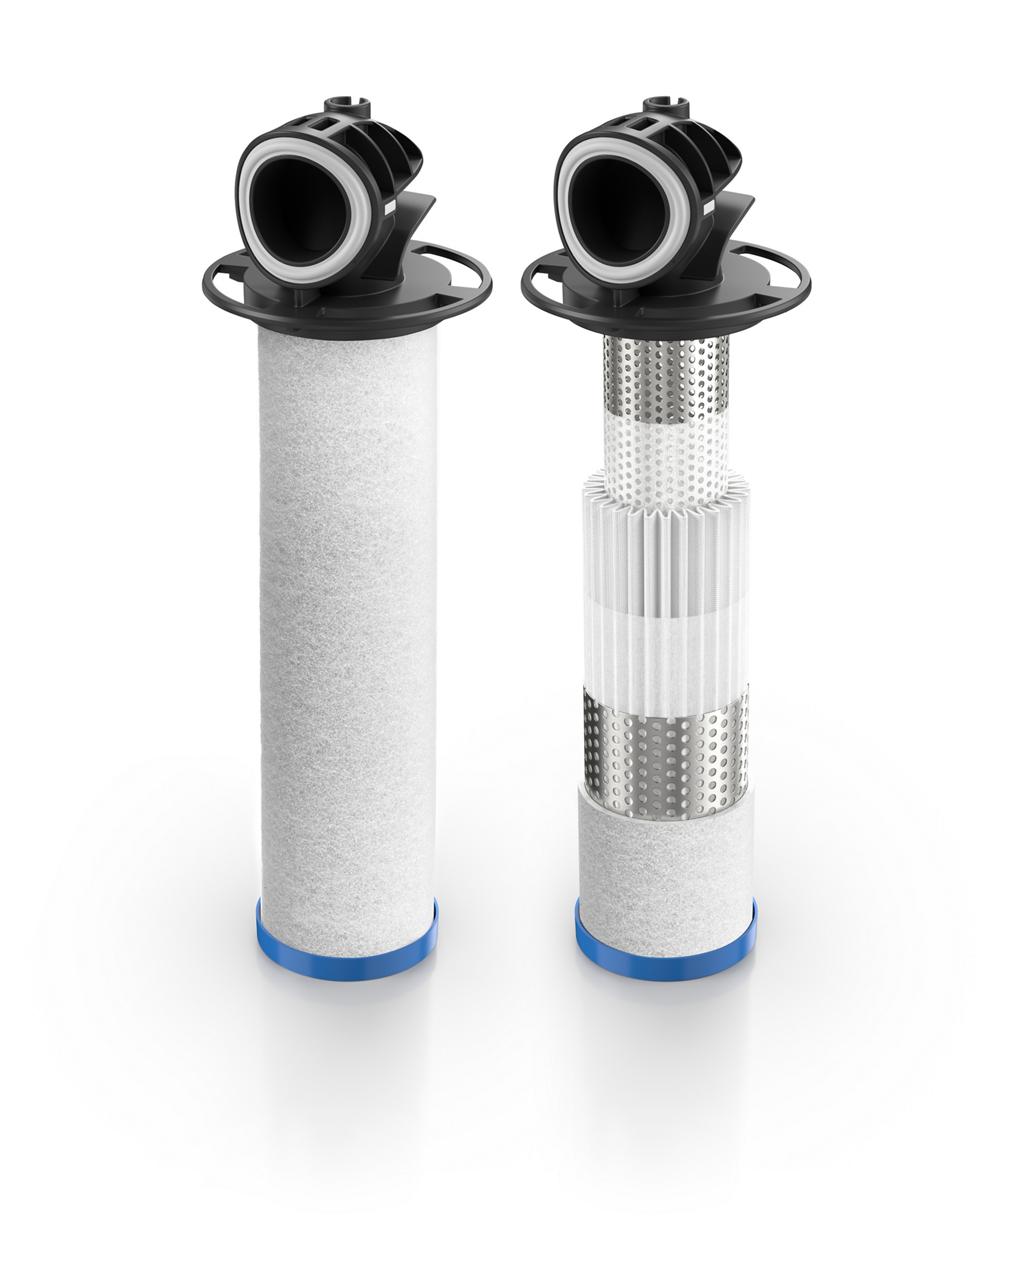 Next generation compressed air filters DDp